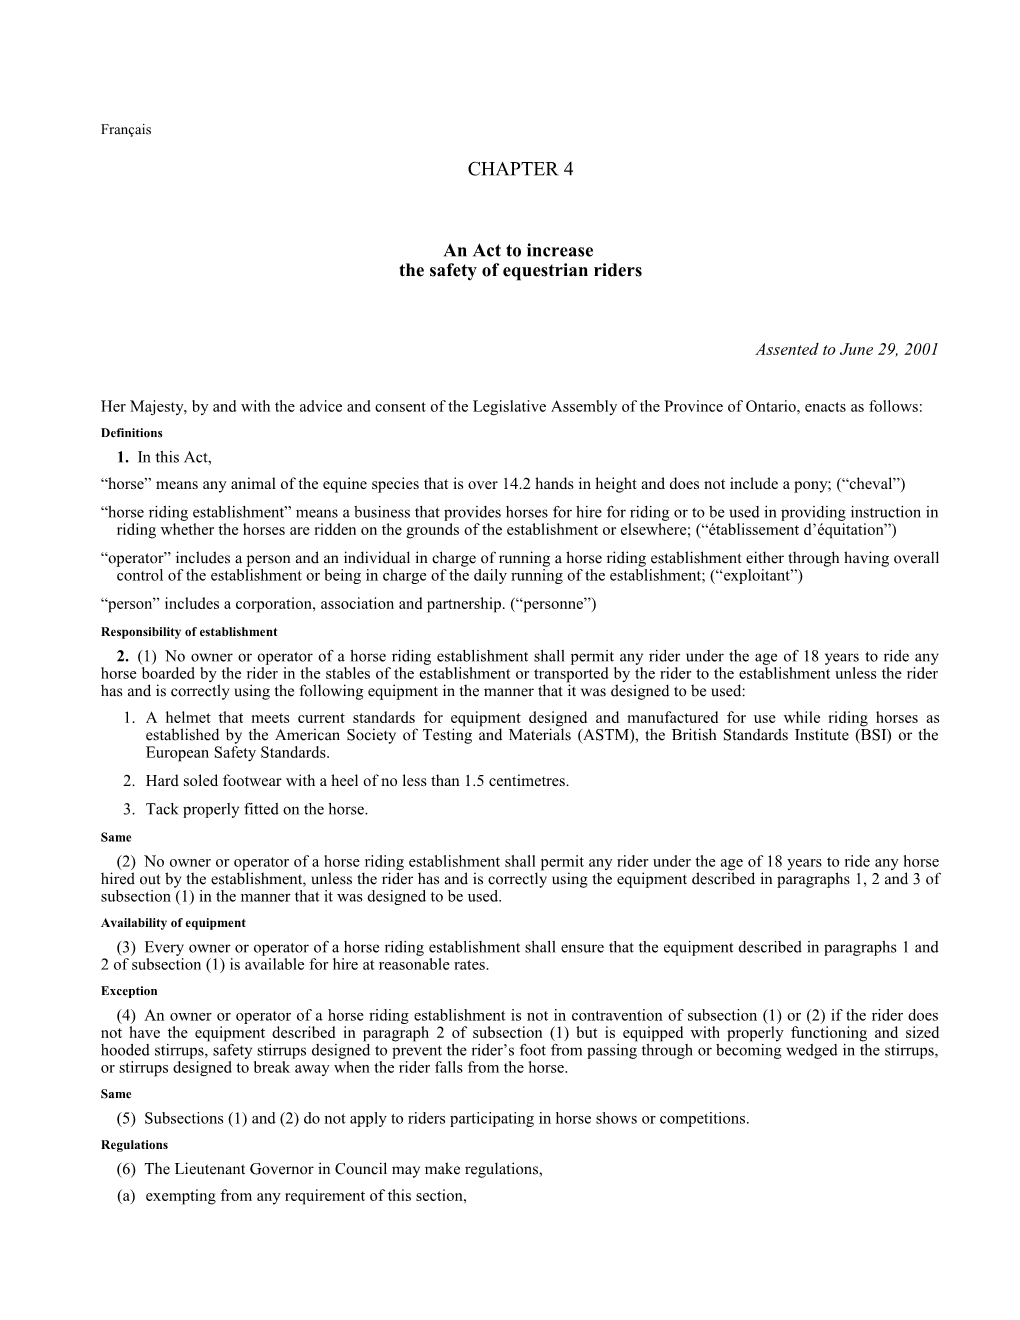 Horse Riding Safety Act, 2001, S.O. 2001, C. 4 - Bill 12